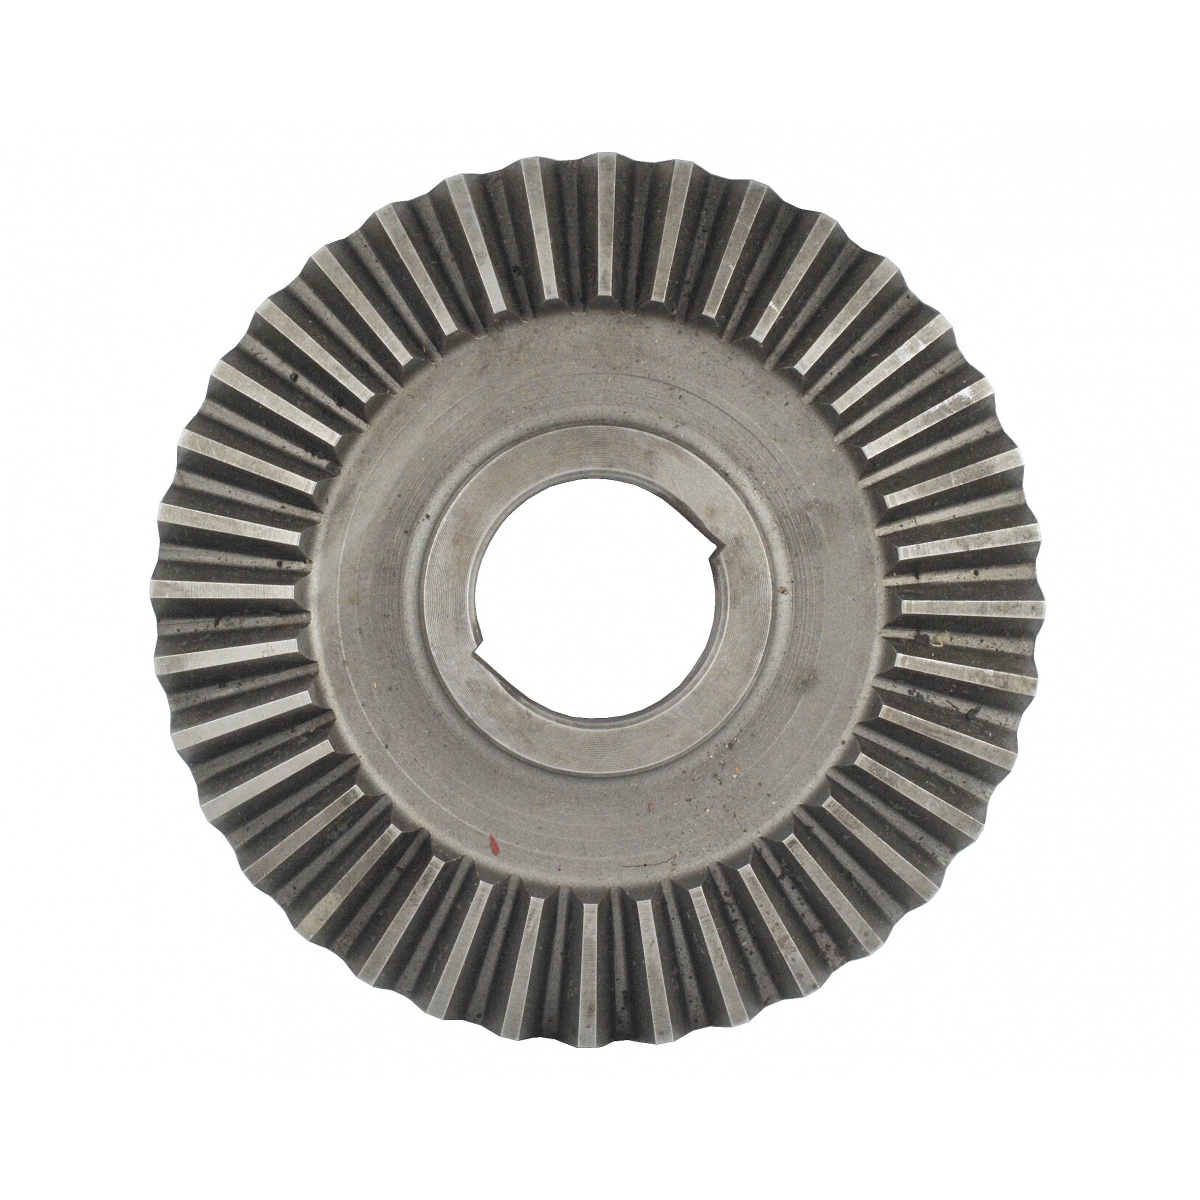 all categories - 36T bevel sprocket gear for angle gear flail mower EFGC and AG